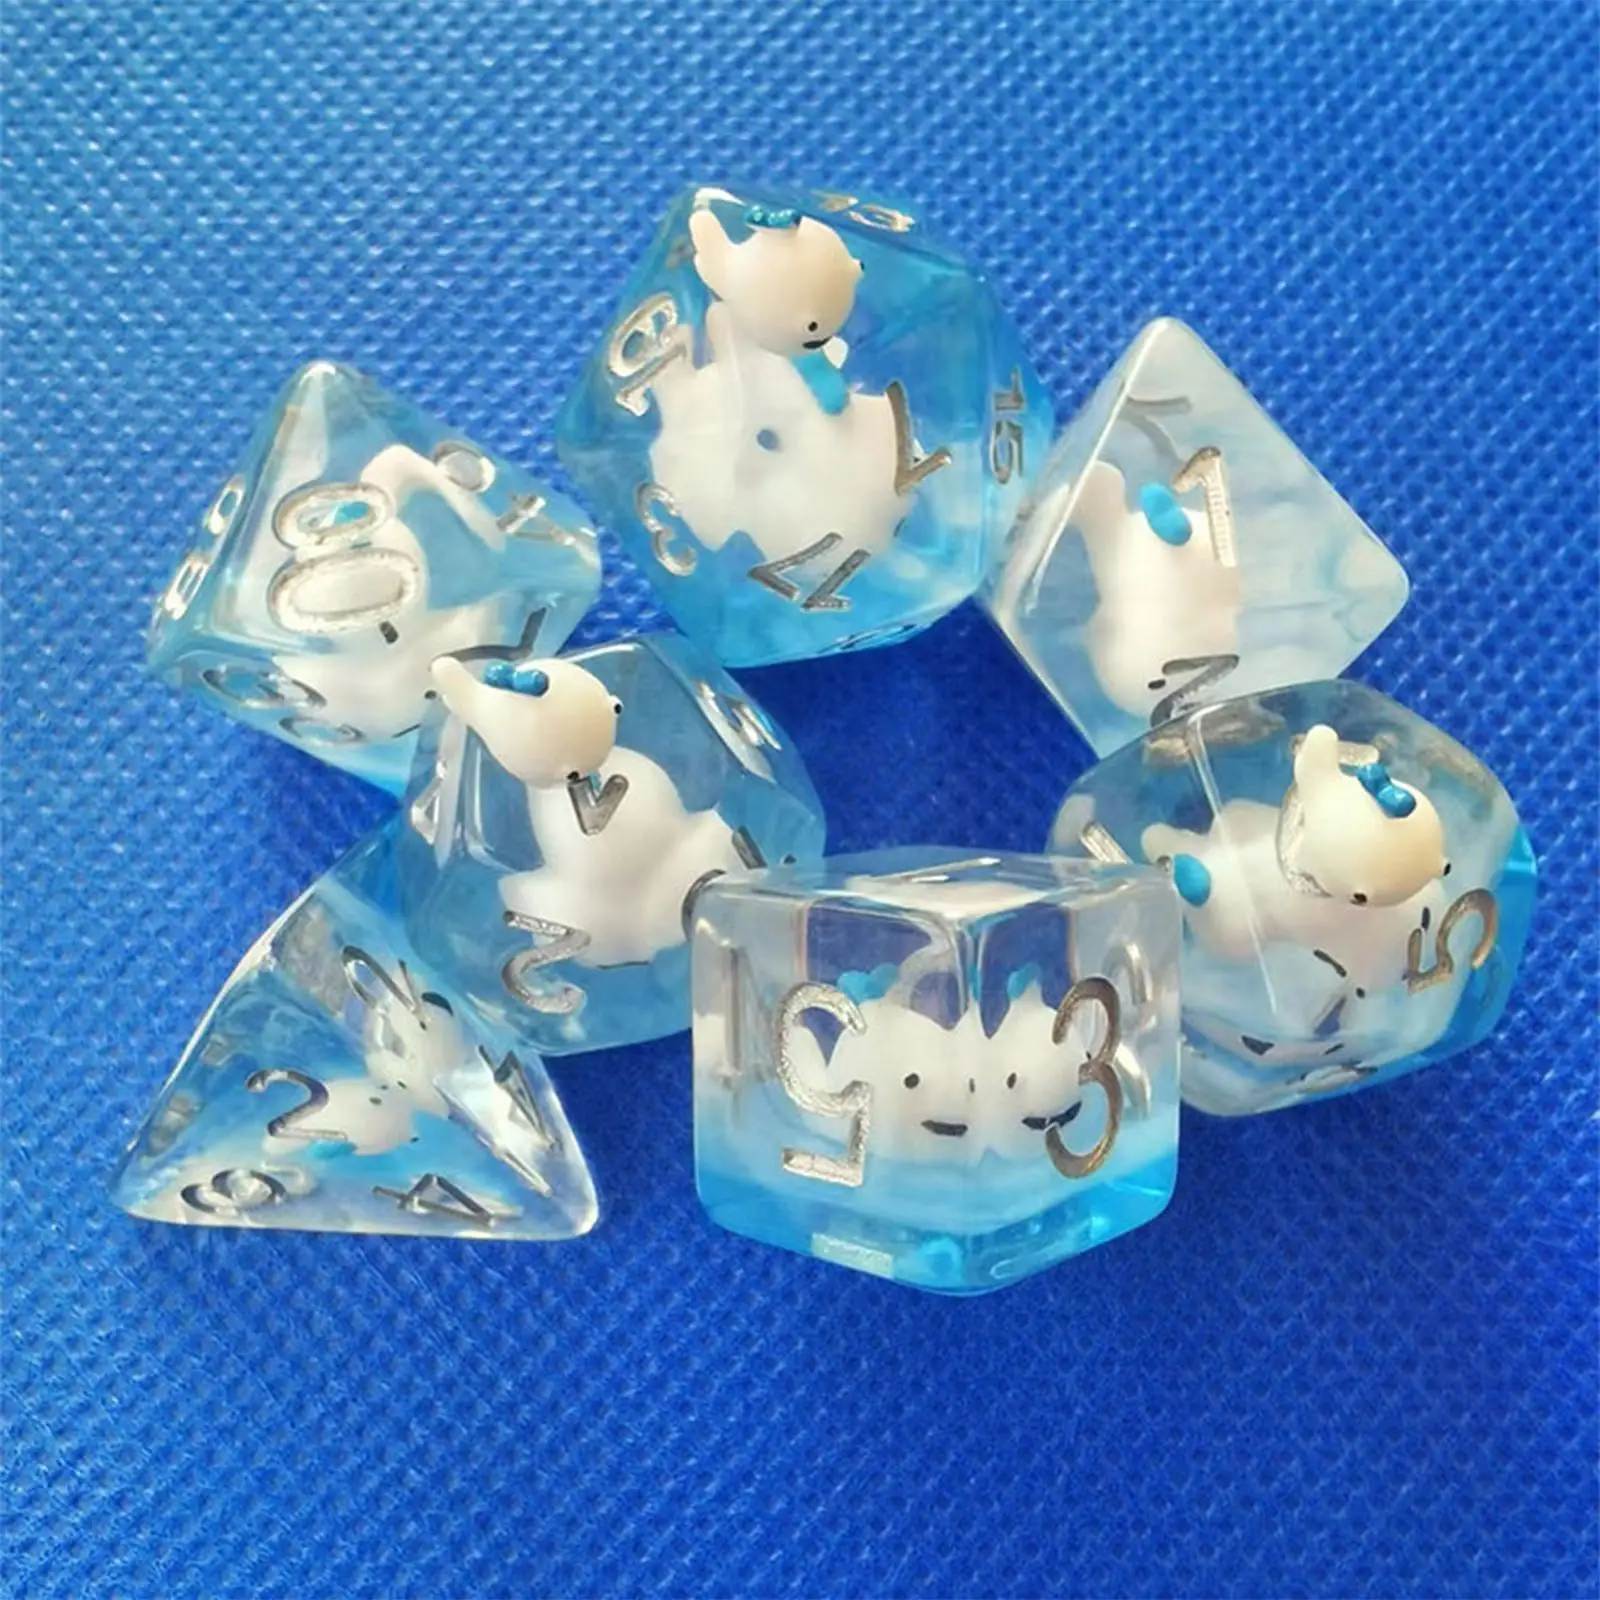 7 Pieces Polyhedral dices Built in Dolphin for Drinking Prop Entertainment